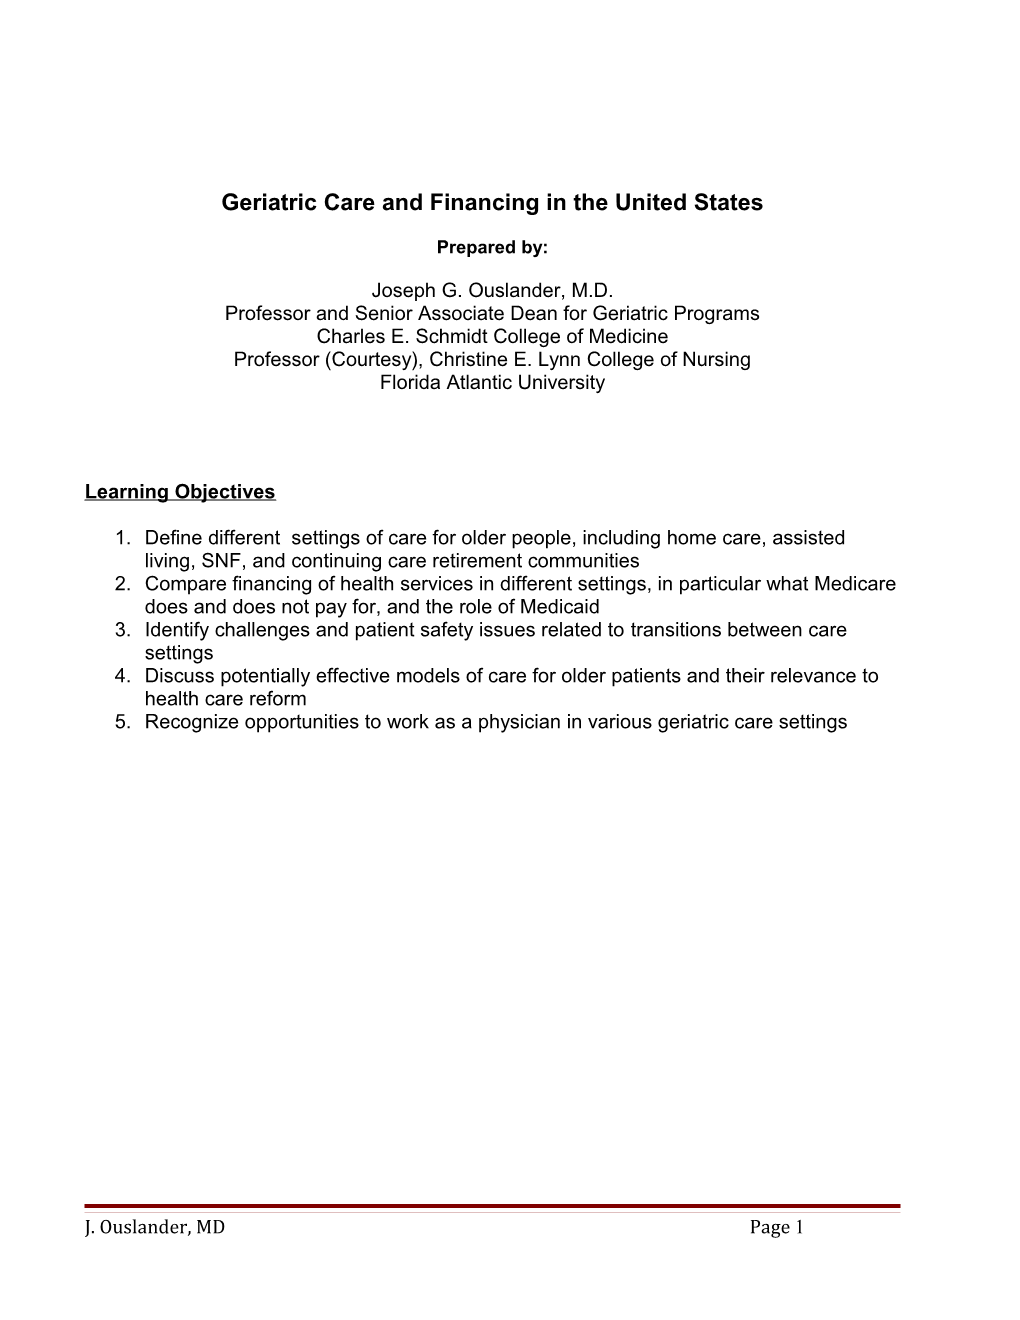 Financing Geriatric Care in the United States